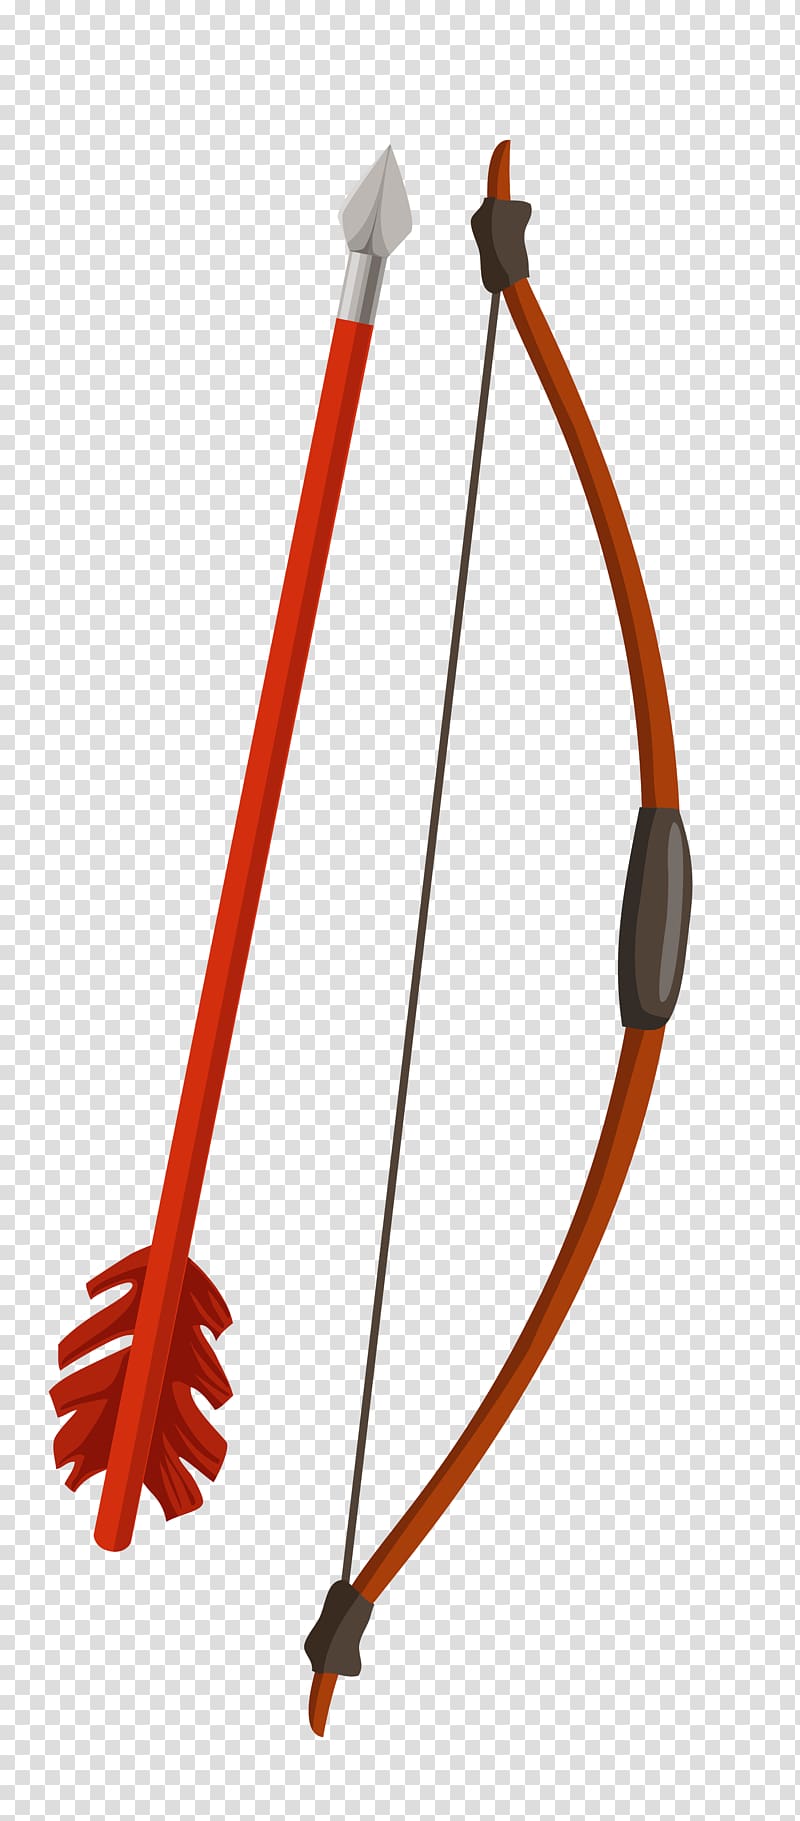 Euclidean Bow and arrow, bow and arrow material transparent background PNG clipart